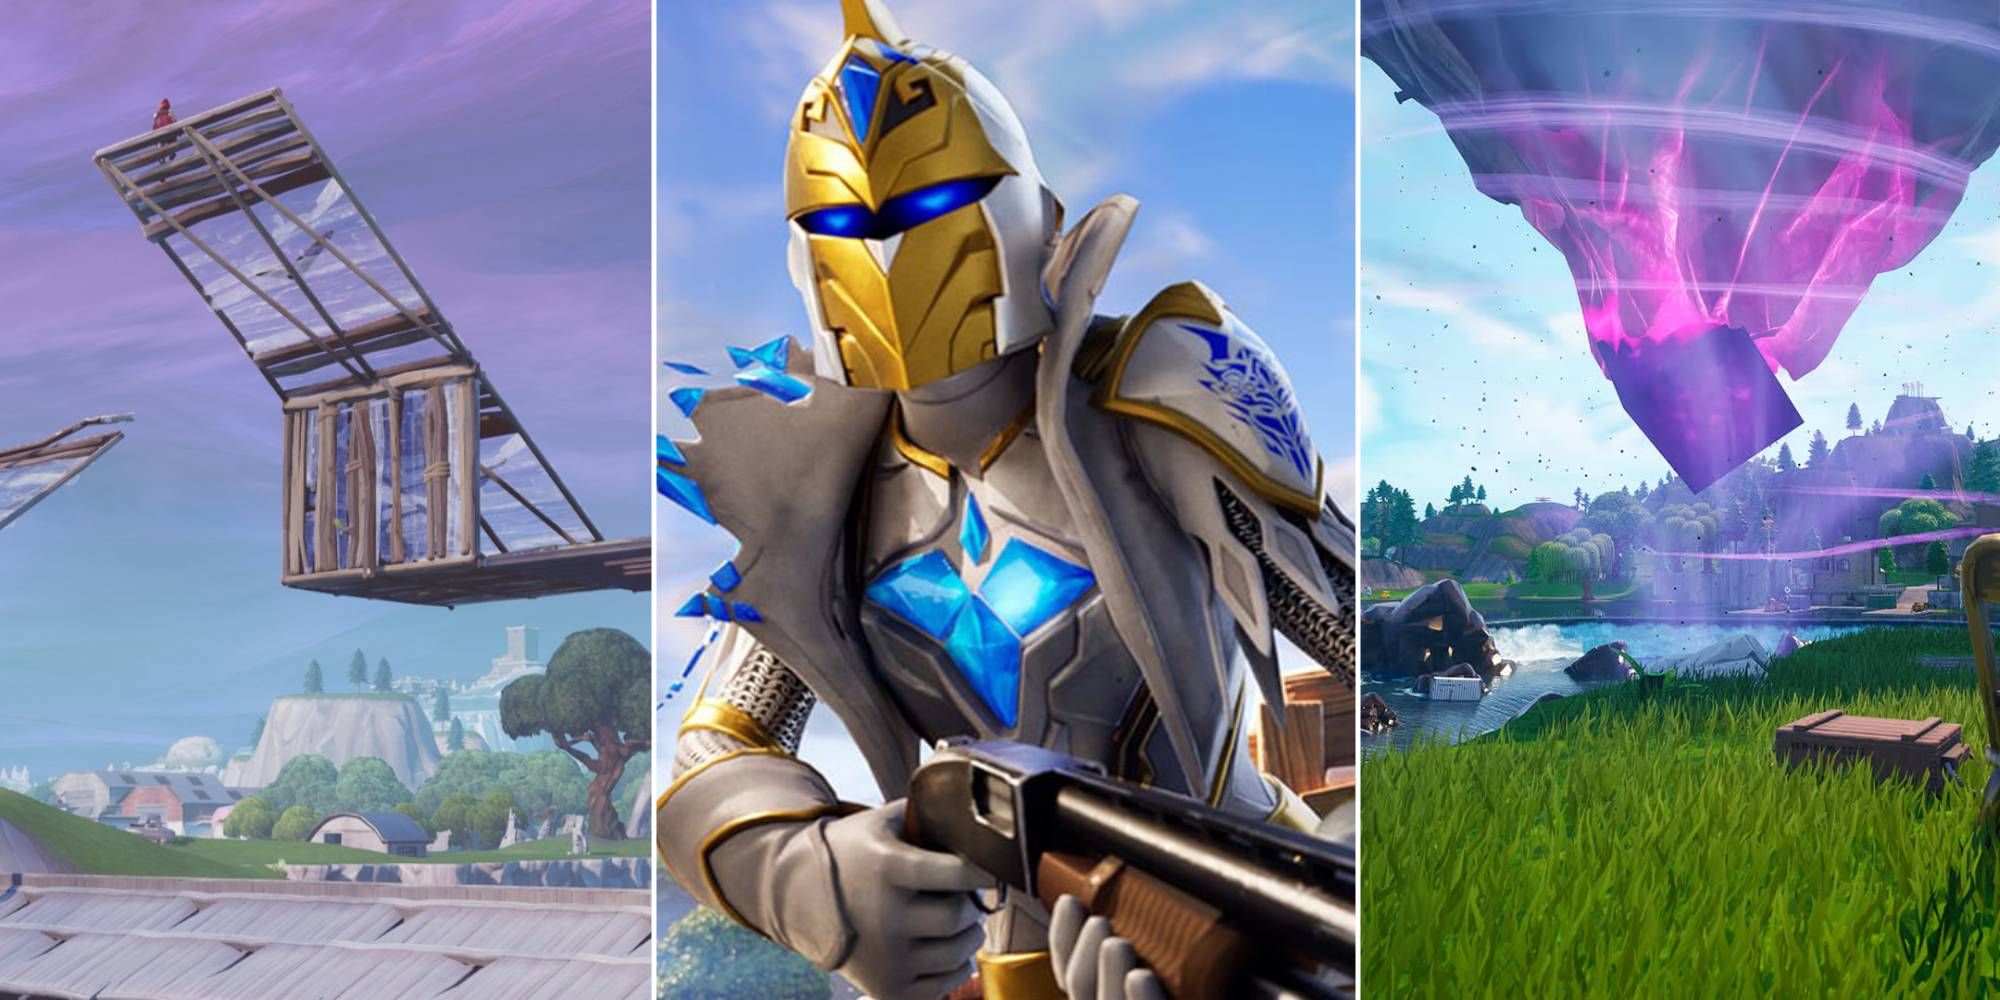 A player builds up with wood, Spectra Knight runs with a shotgun, and the island of Loot Lake rises from the water in OG Fortnite.